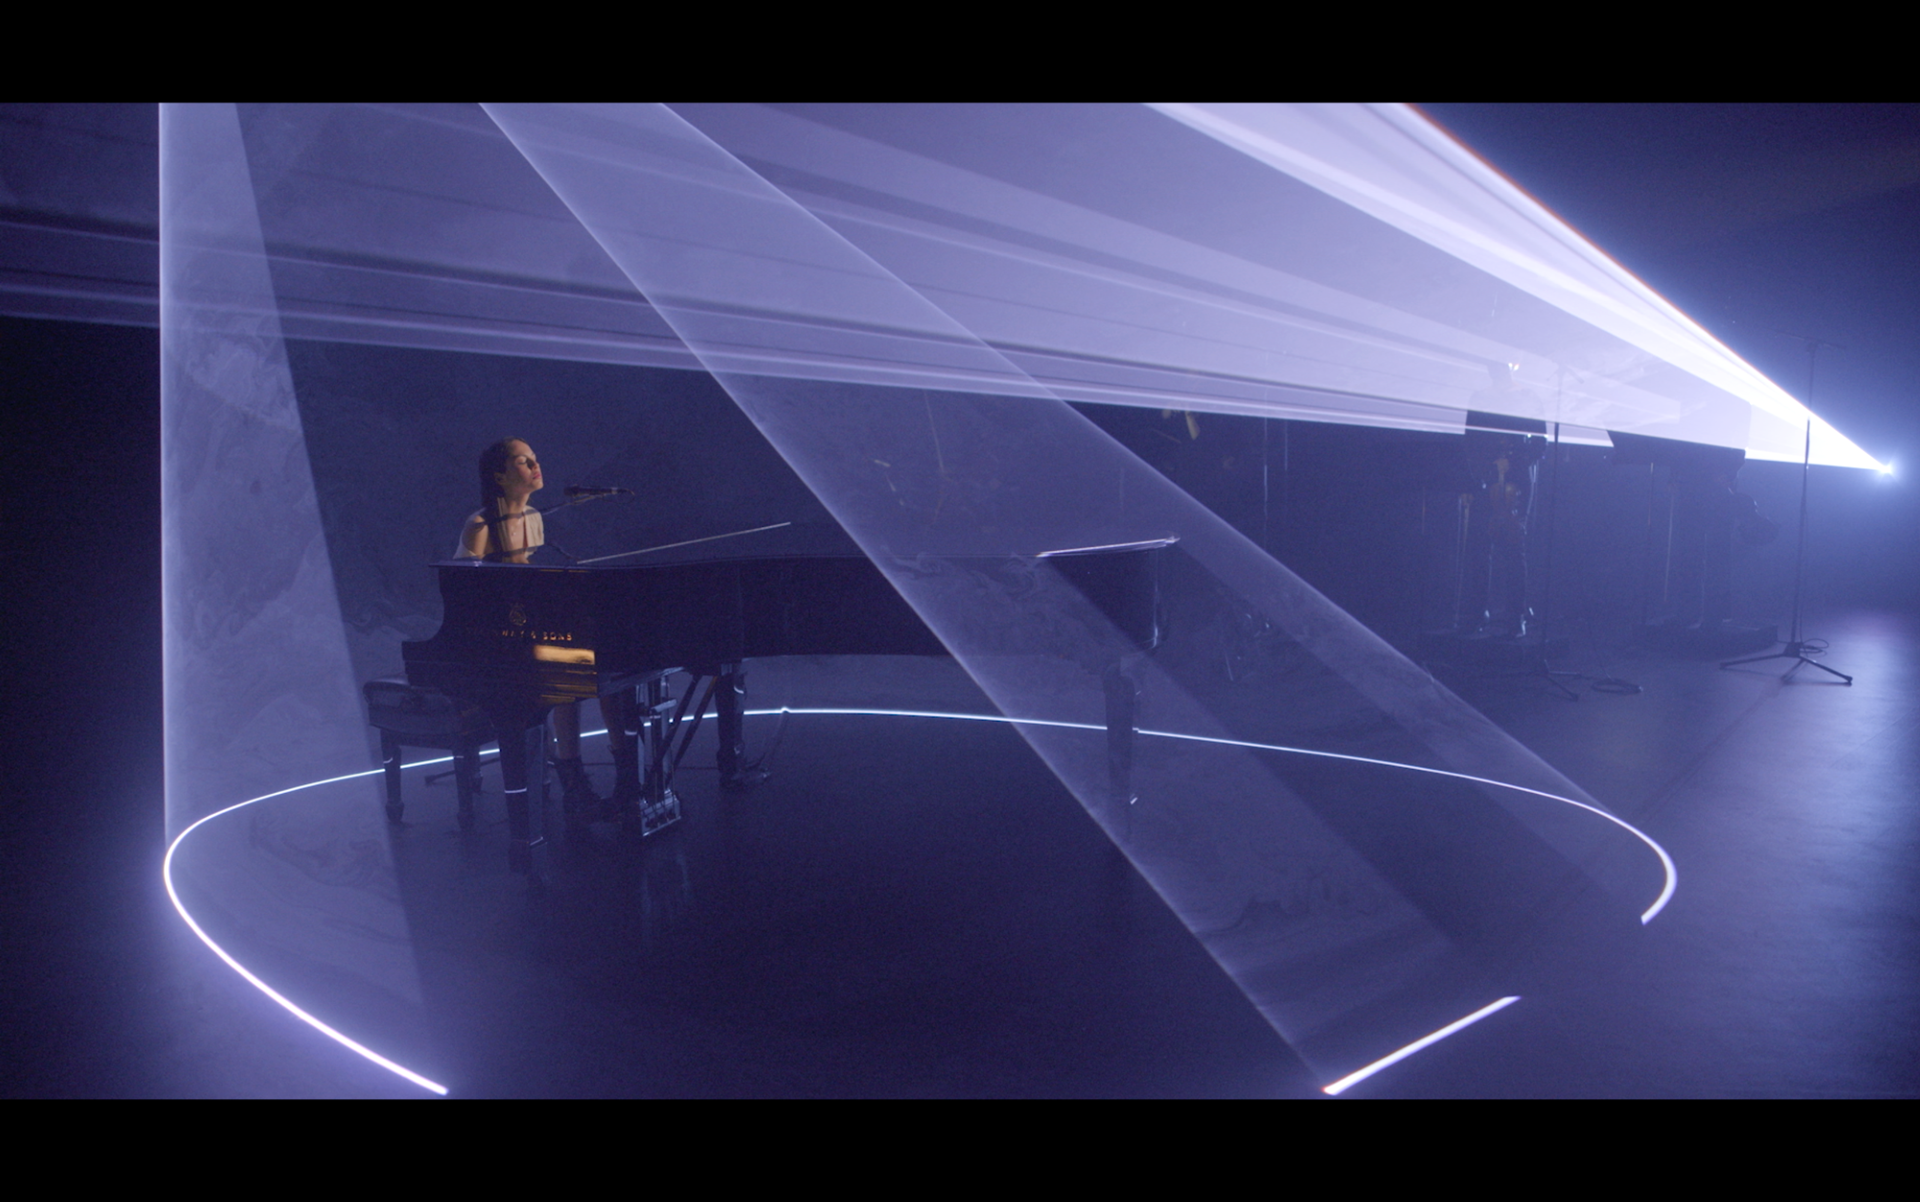 Female performing at a piano surrounded by dramatic stage lighting.